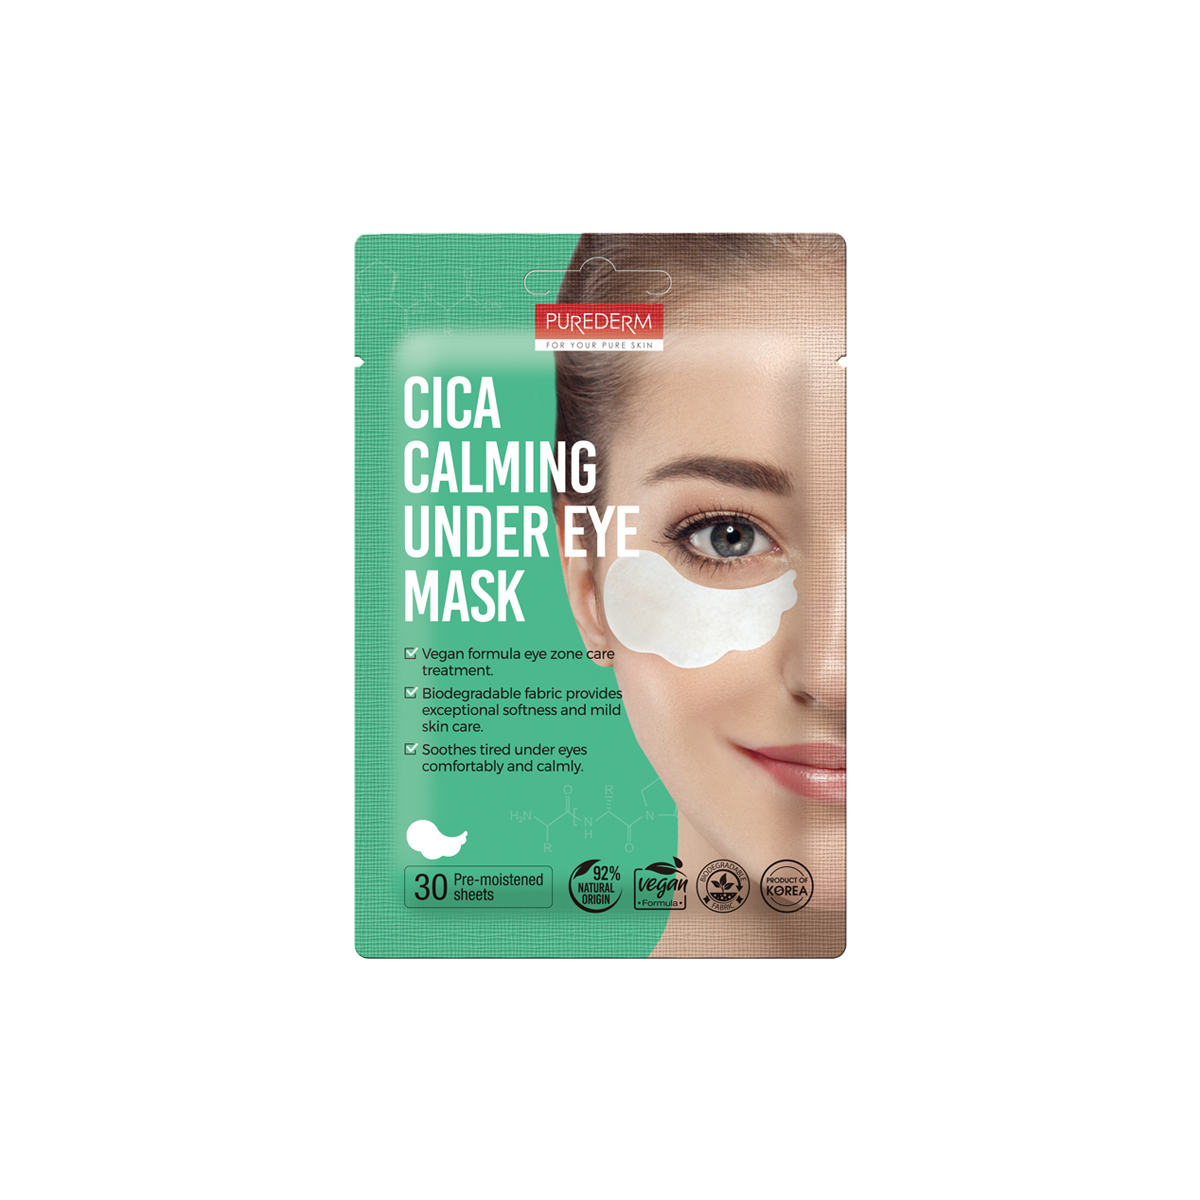 142-8809738321188-ADS-713-Purederm Cica Calming Under Eye Mask (30 Pre-moistened sheets)